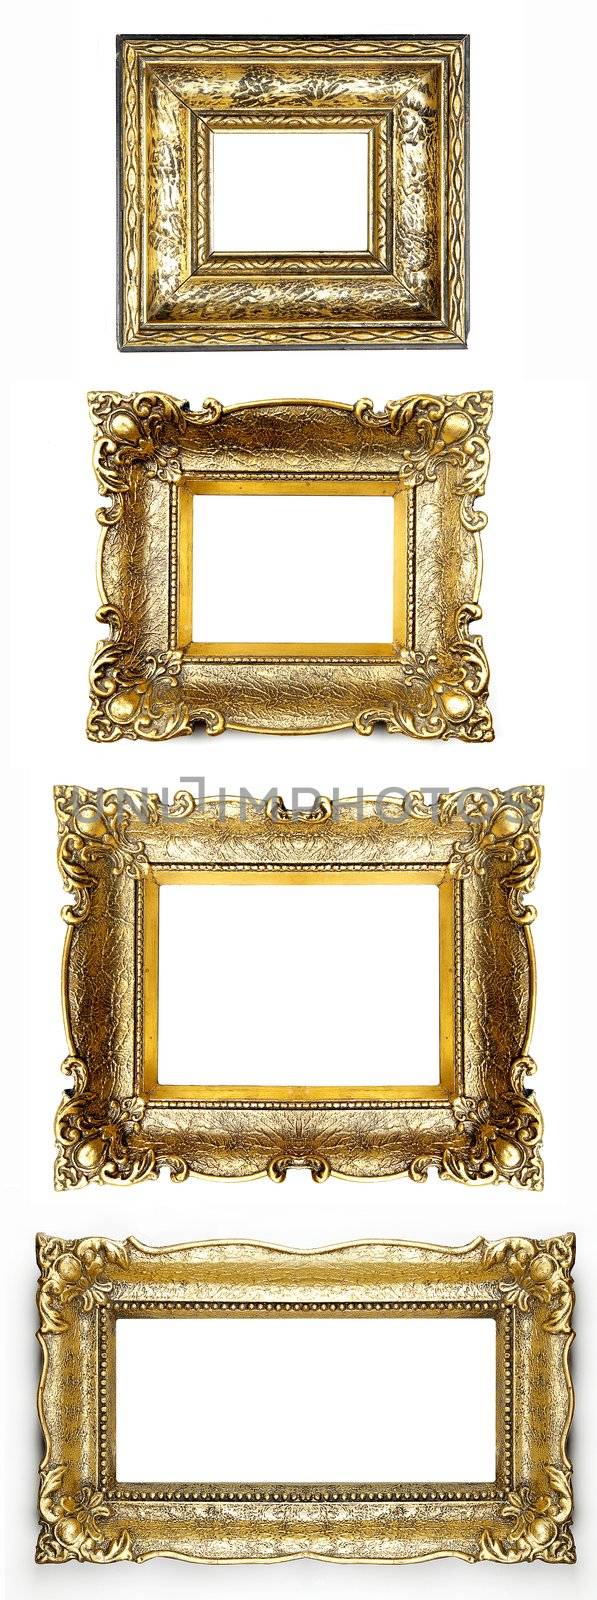 Old Picture Frame Collection by adamr